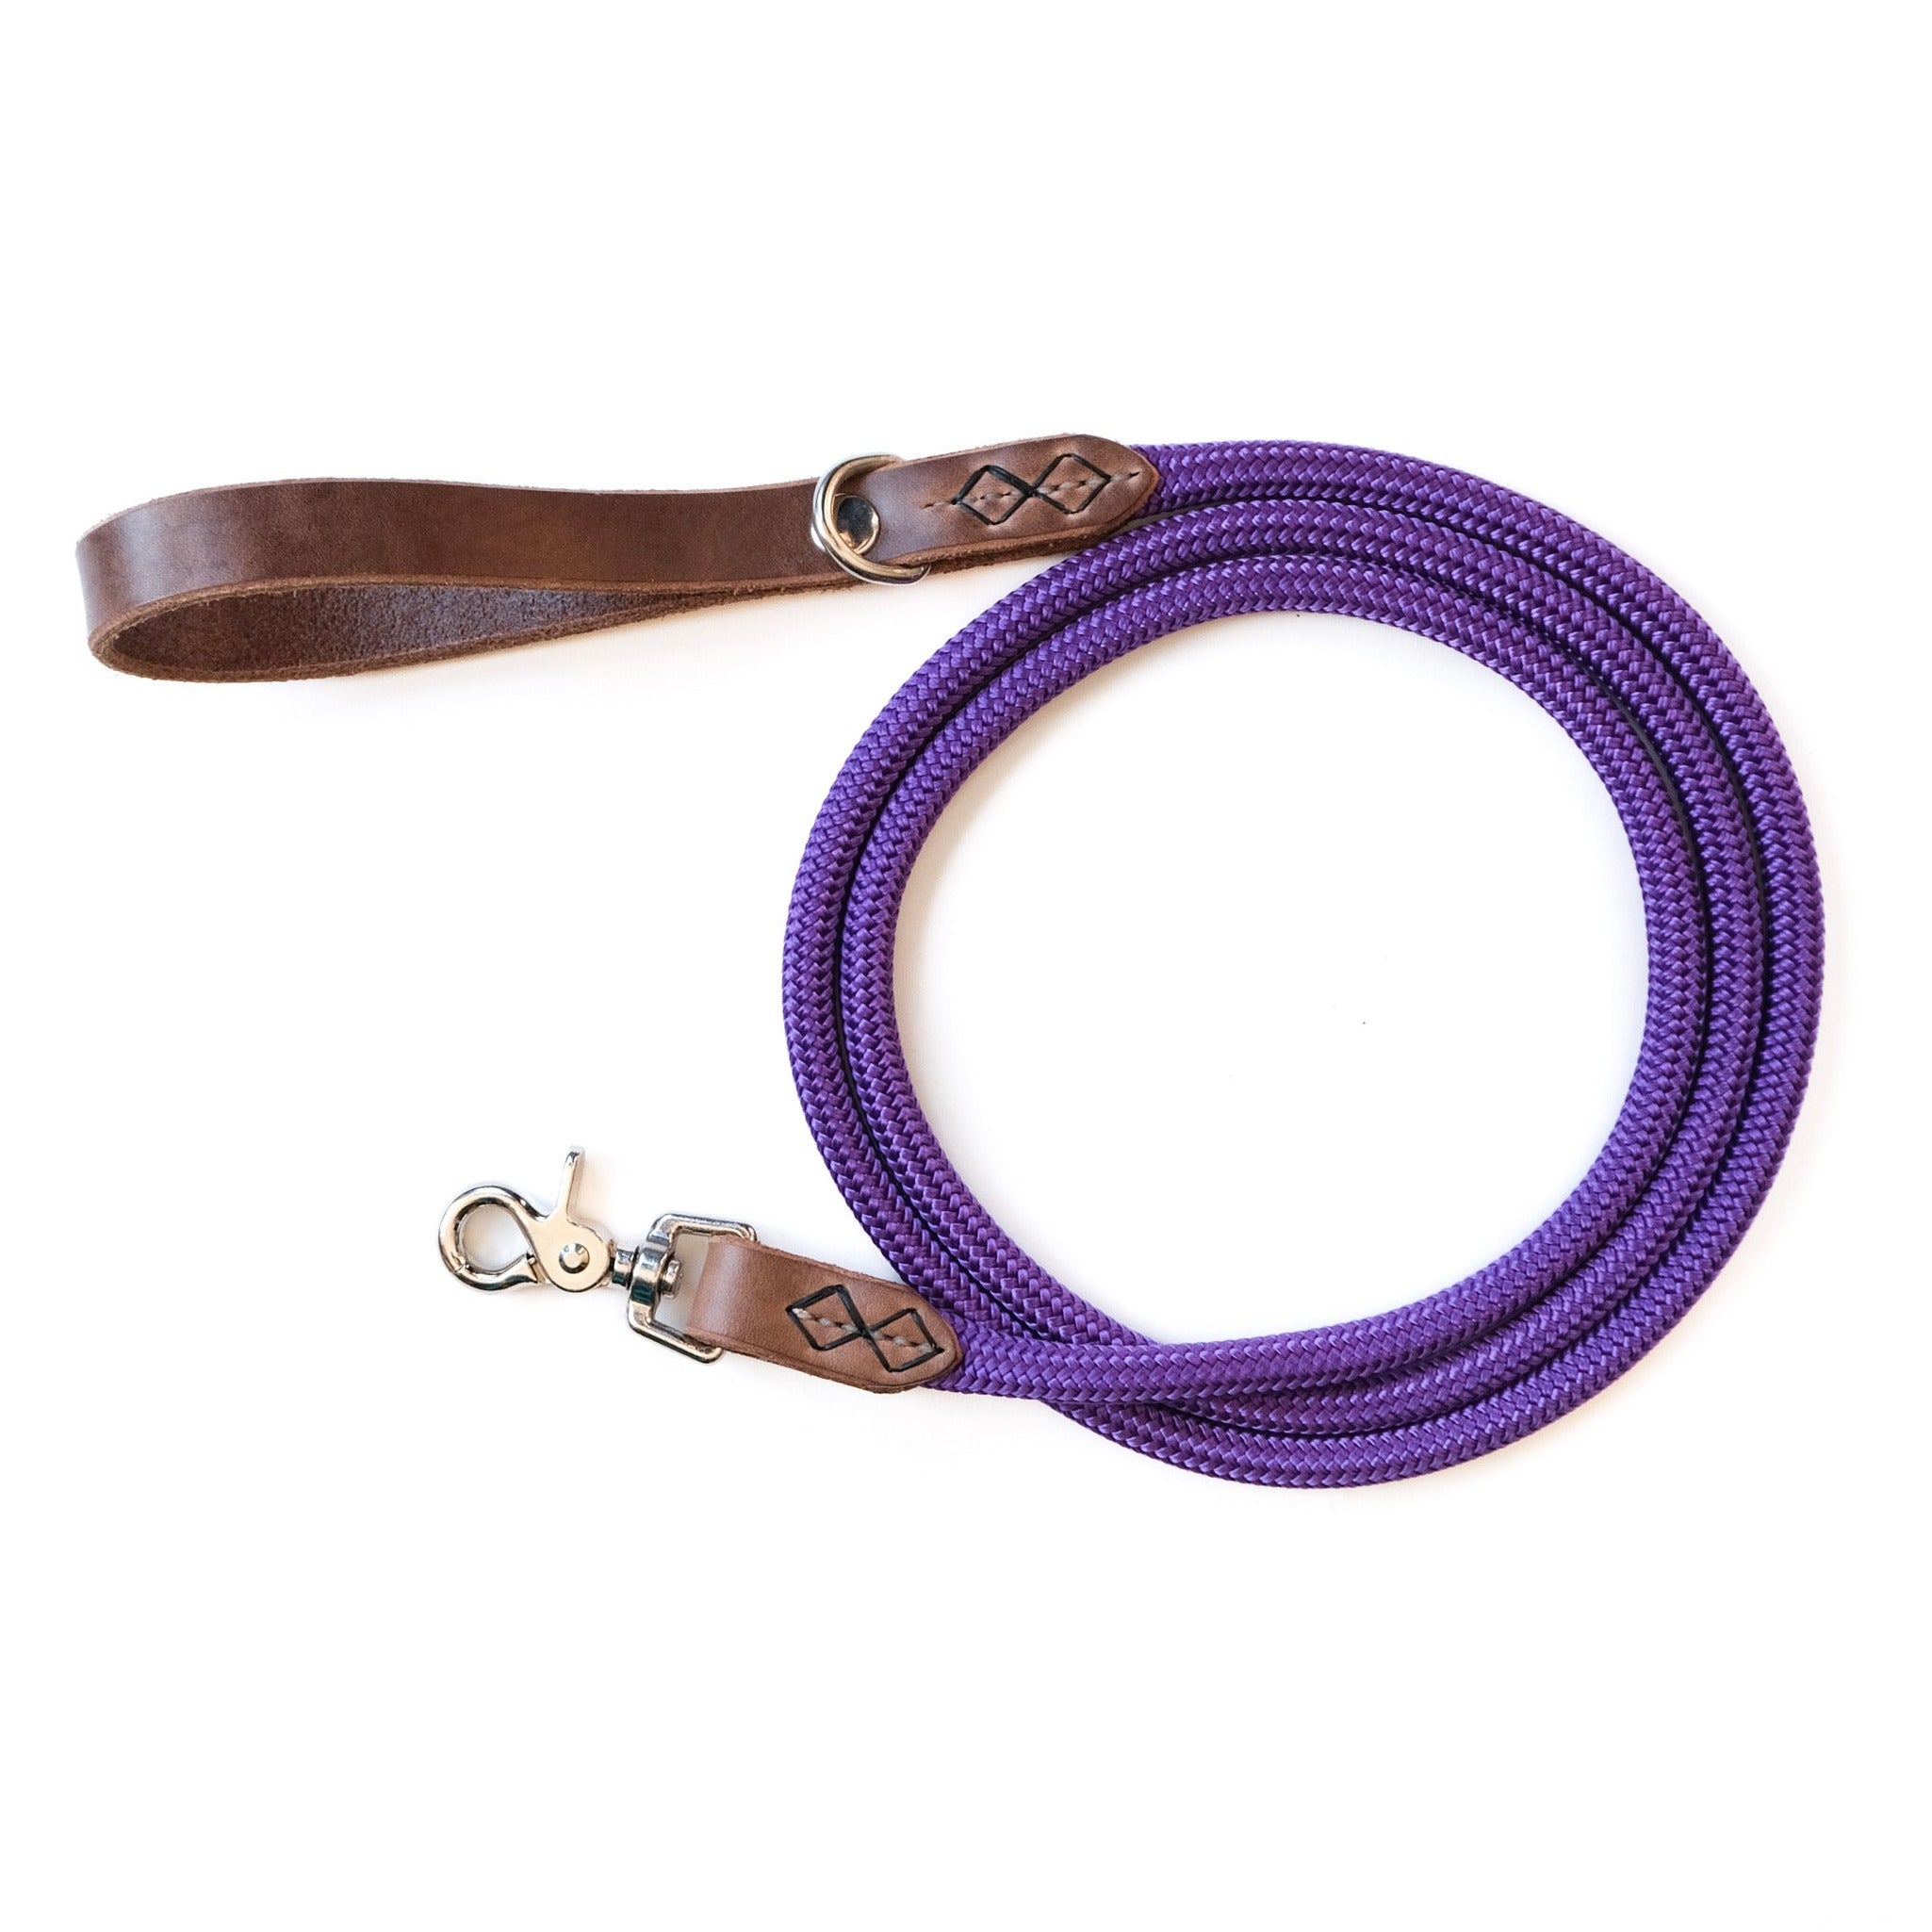 Dog Leash with Leather Handle Cotton Rope